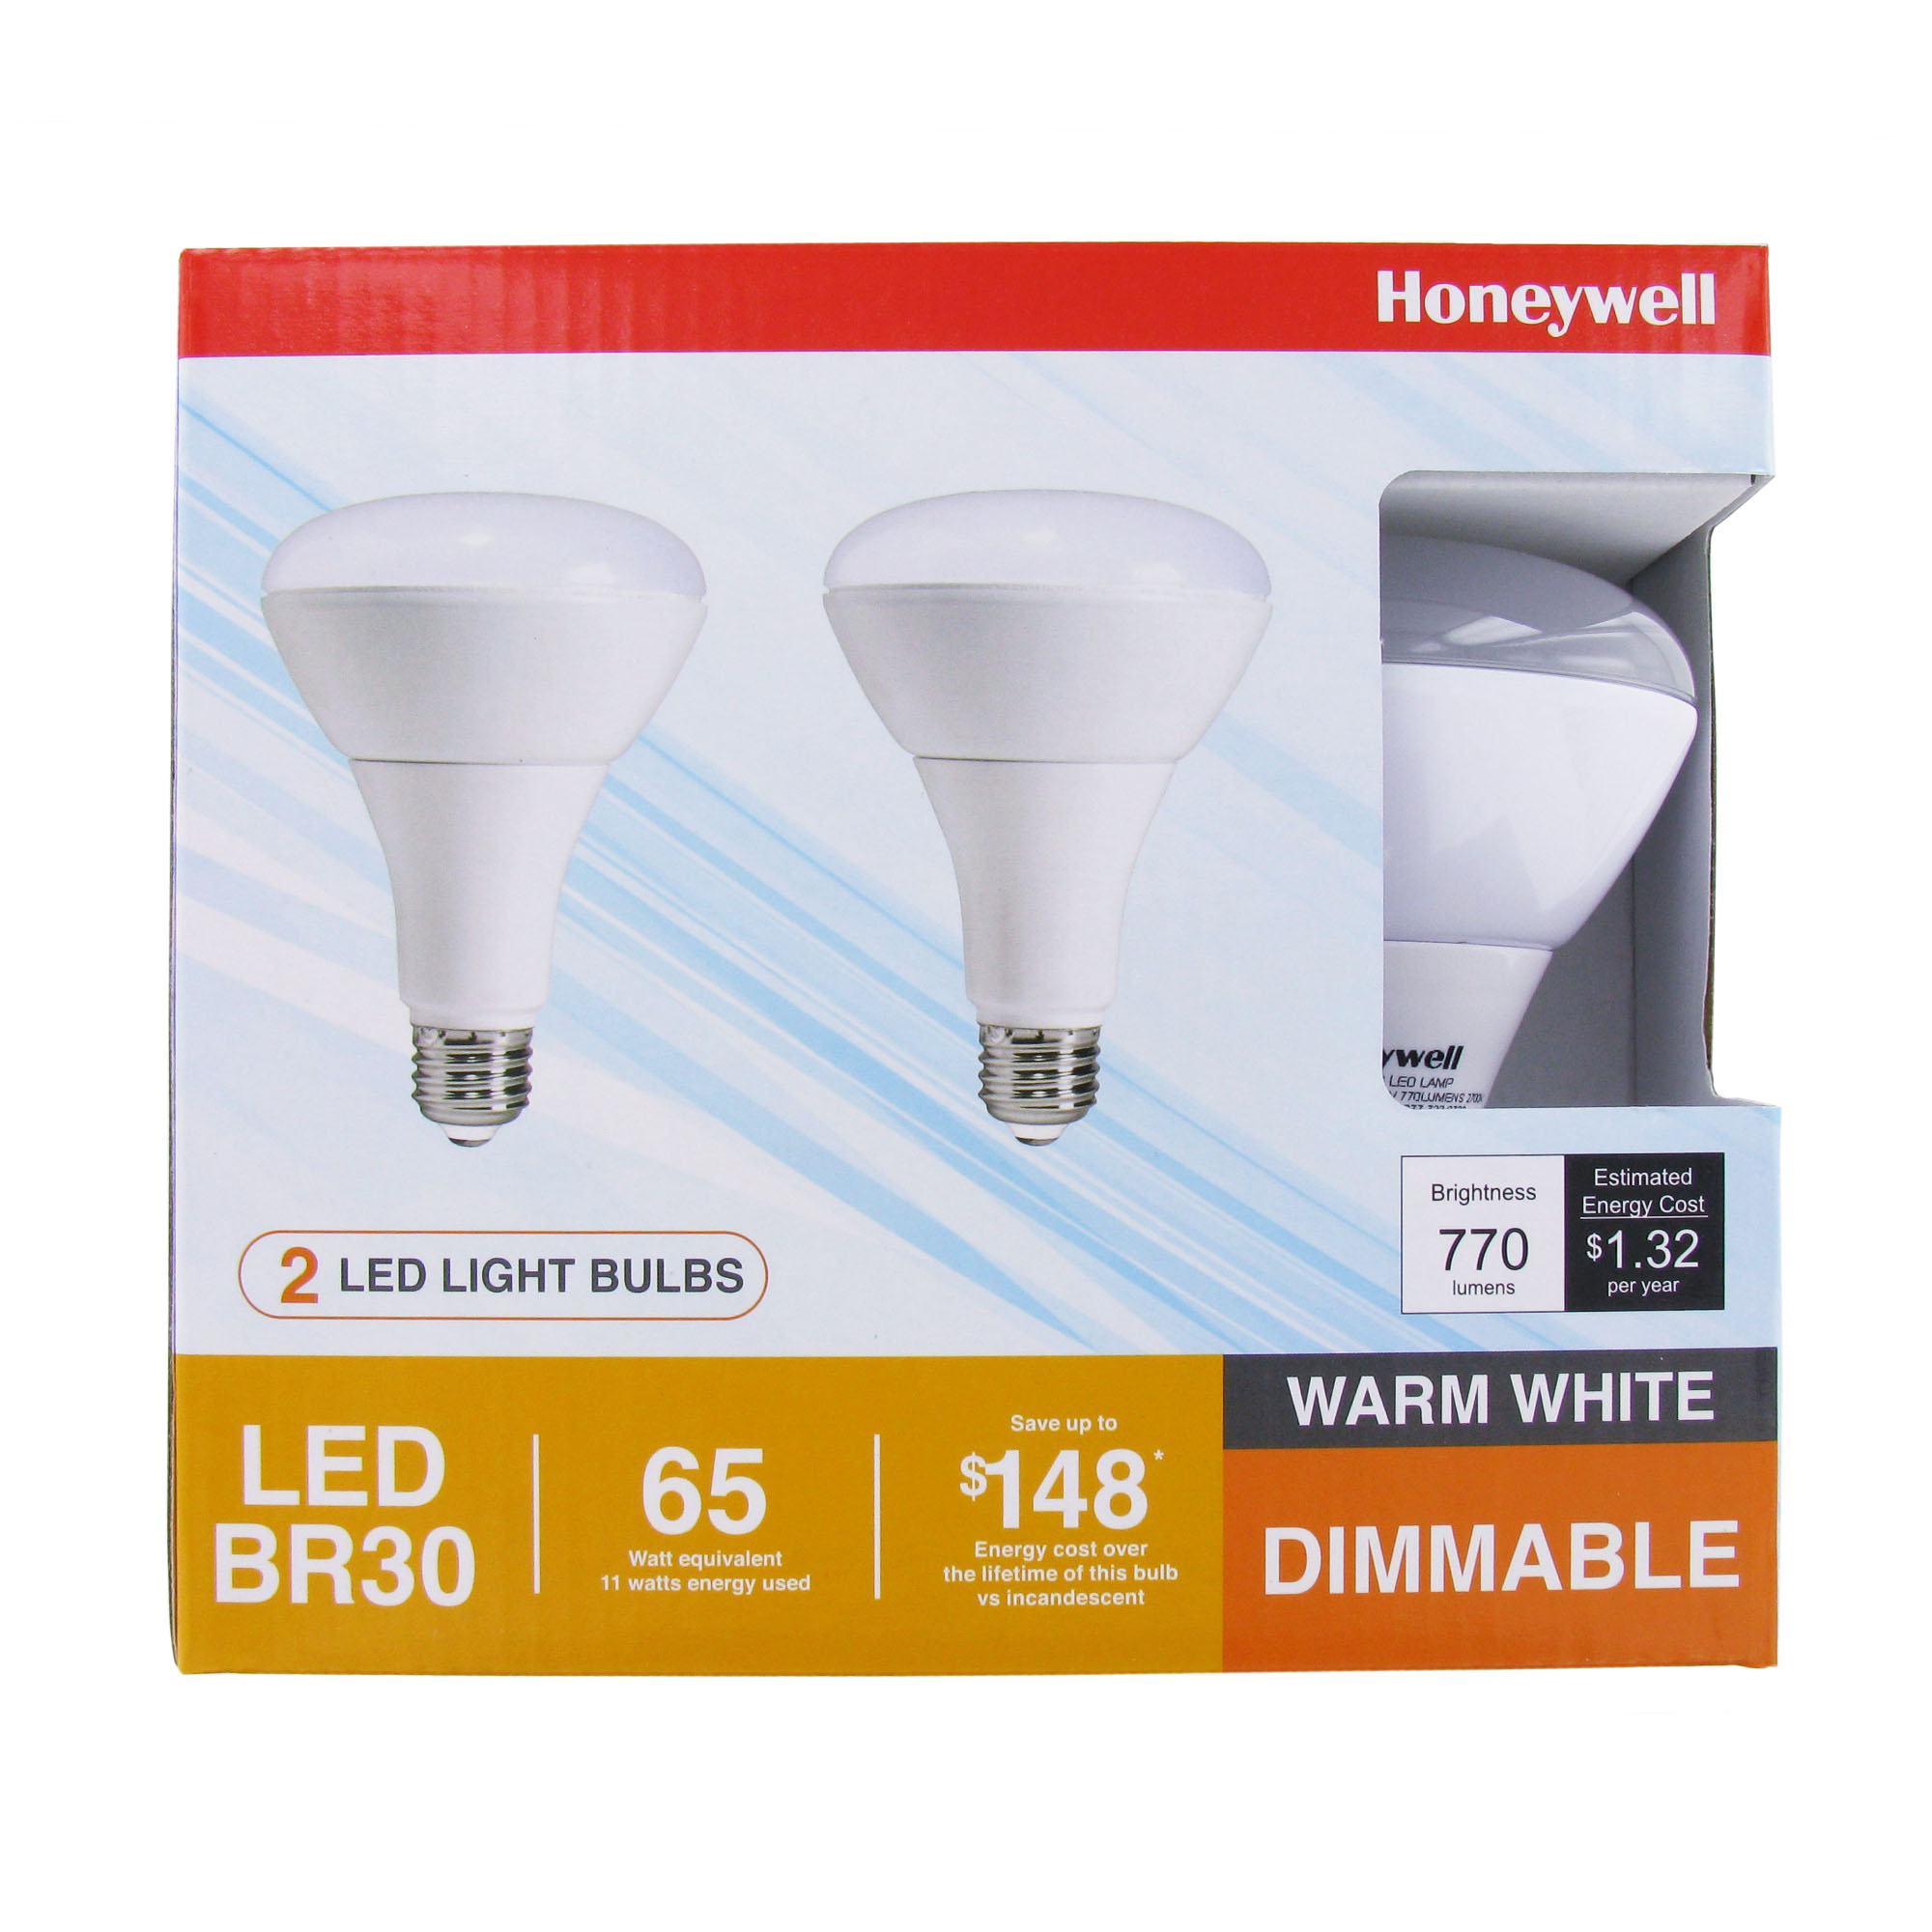 Honeywell 65W Equivalent BR30 Dimmable LED Light Bulb - 2 Pack, FE0501